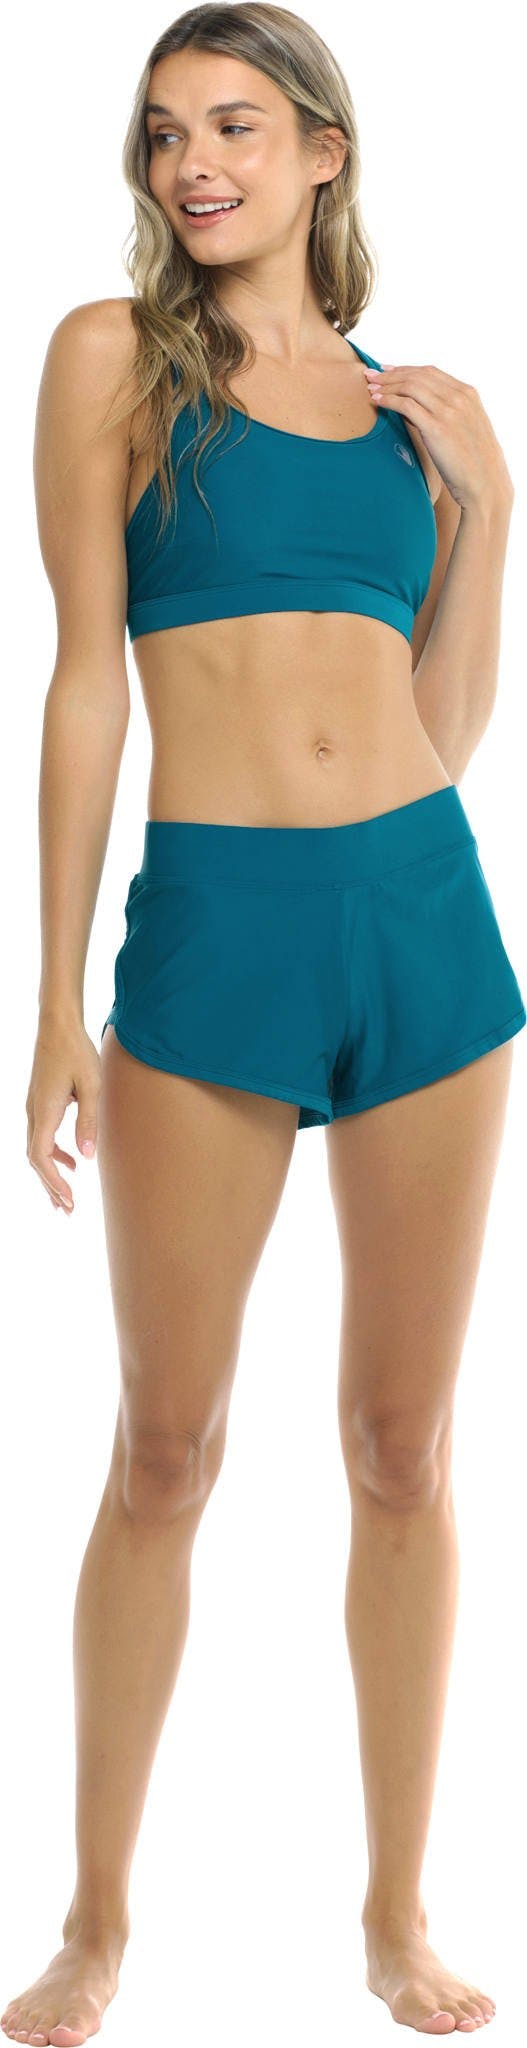 Product image for Smoothies Pulse Pull-On Shorts - Women's